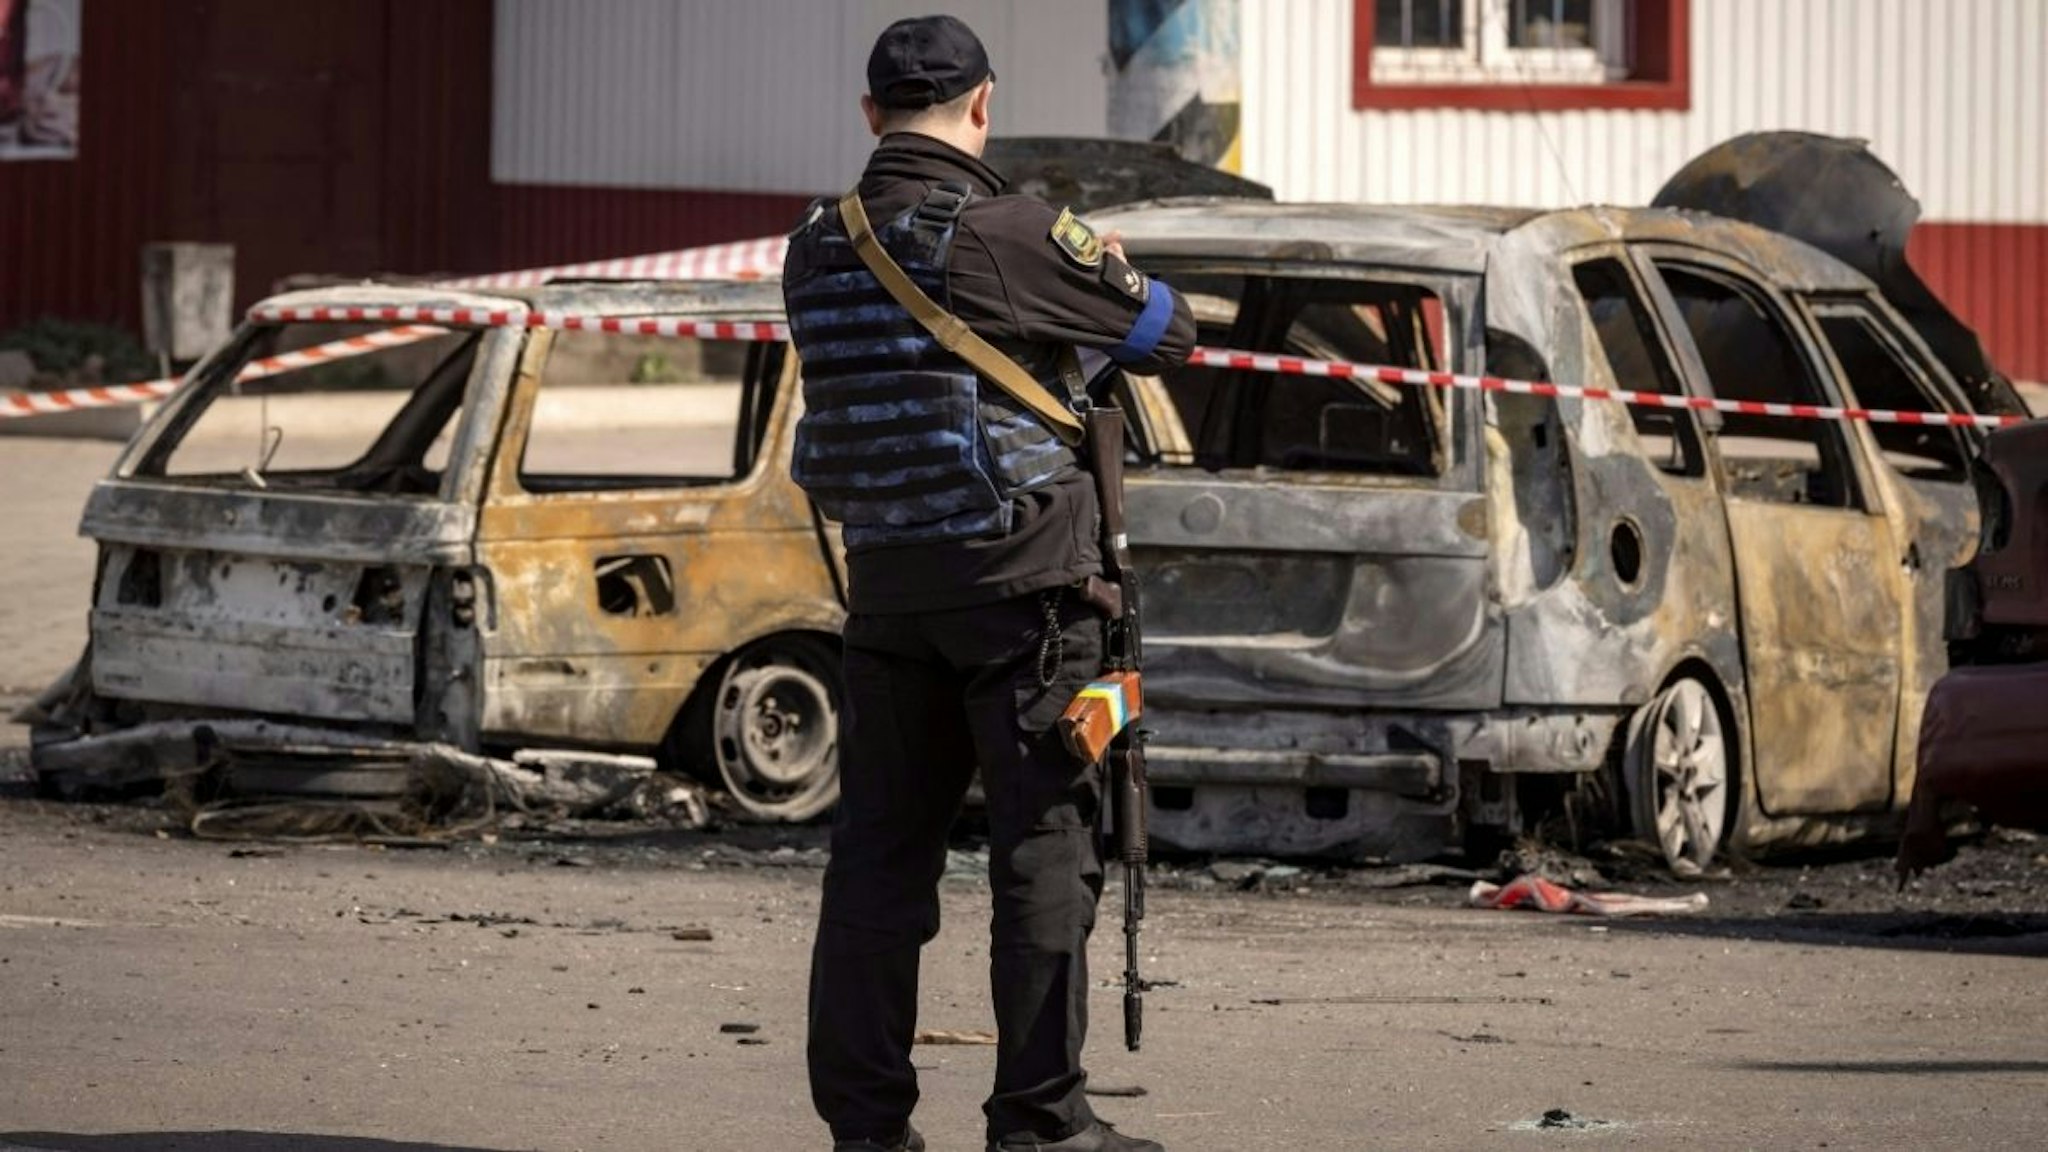 A Ukrainian police stands by calcinated cars outside a train station in Kramatorsk, eastern Ukraine, that was being used for civilian evacuations, after it was hit by a rocket attack killing at least 35 people, on April 8, 2022.